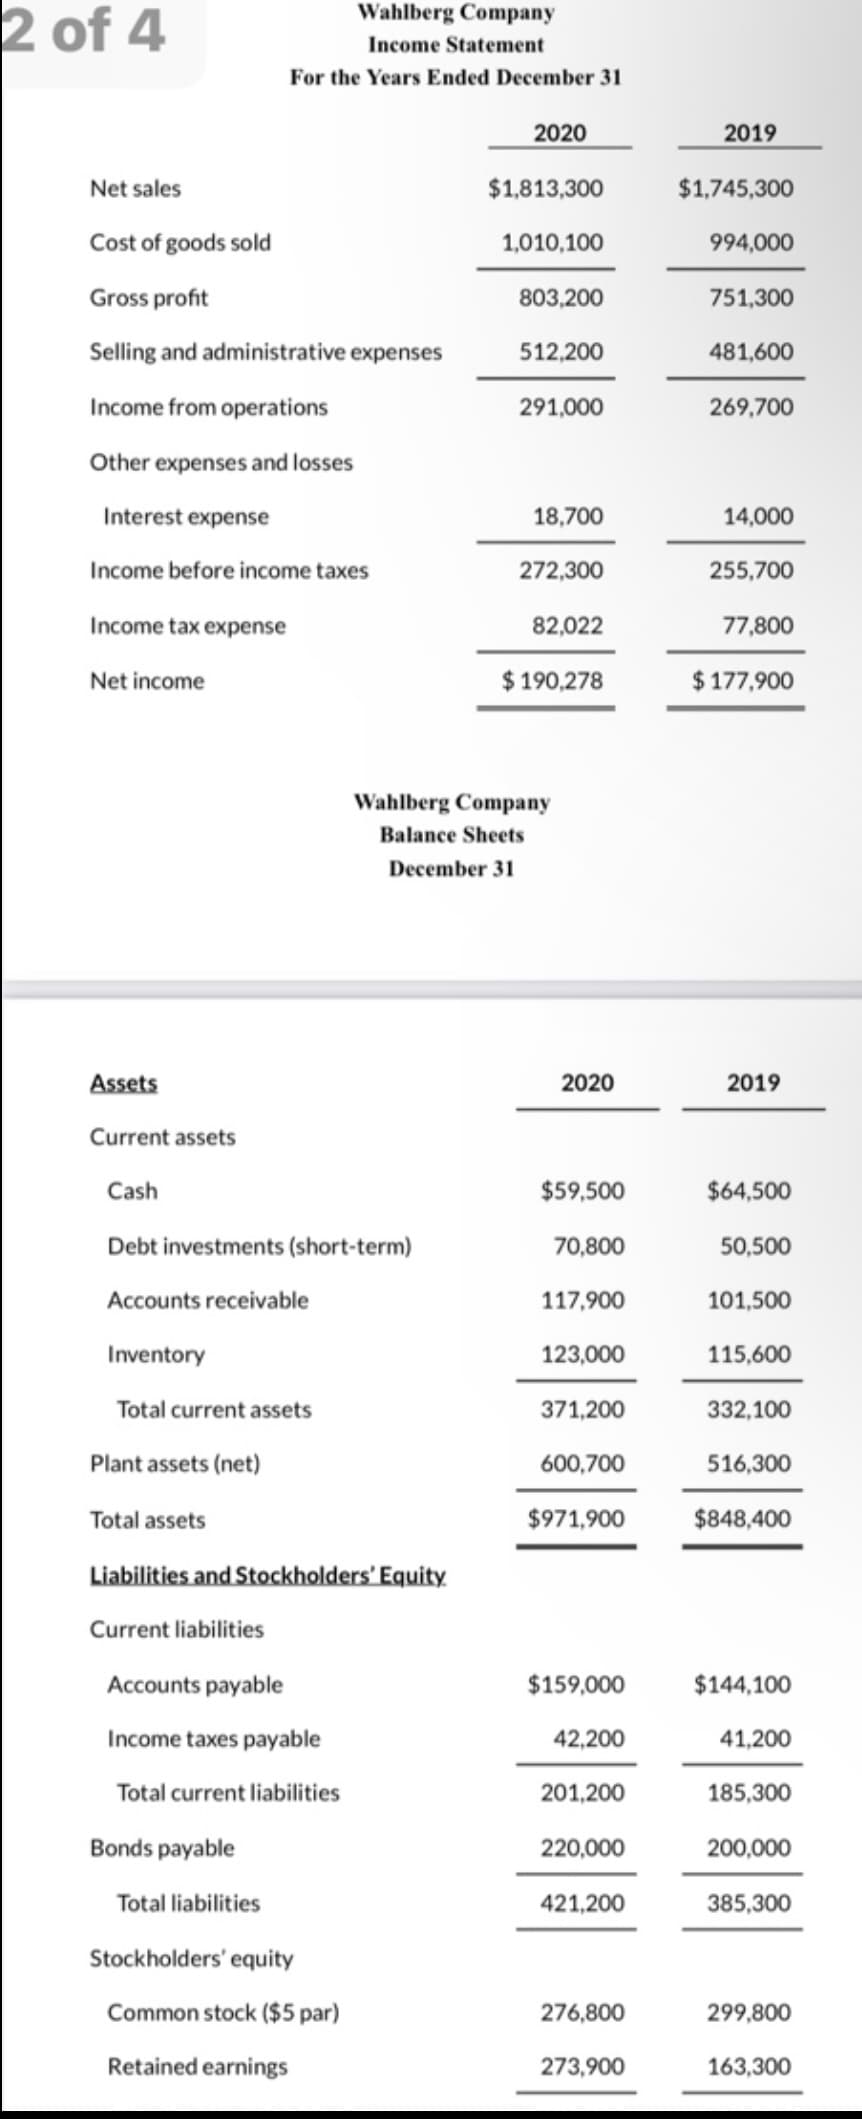 2 of 4
Wahlberg Company
Income Statement
For the Years Ended December 31
2020
2019
Net sales
$1,813,300
$1,745,300
Cost of goods sold
1,010,100
994,000
Gross profit
803,200
751,300
Selling and administrative expenses
512,200
481,600
Income from operations
291,000
269,700
Other expenses and losses
Interest expense
18,700
14,000
Income before income taxes
272,300
255,700
Income tax expense
82,022
77,800
Net income
$ 190,278
$ 177,900
Wahlberg Company
Balance Sheets
December 31
Assets
2020
2019
Current assets
Cash
$59,500
$64,500
Debt investments (short-term)
70,800
50,500
Accounts receivable
117,900
101,500
Inventory
123,000
115,600
Total current assets
371,200
332,100
Plant assets (net)
600,700
516,300
Total assets
$971,900
$848,400
Liabilities and Stockholders' Equity.
Current liabilities
Accounts payable
$159,000
$144,100
Income taxes payable
42,200
41,200
Total current liabilities
201,200
185,300
Bonds payable
220,000
200,000
Total liabilities
421,200
385,300
Stockholders' equity
Common stock ($5 par)
276,800
299,800
Retained earnings
273,900
163,300
